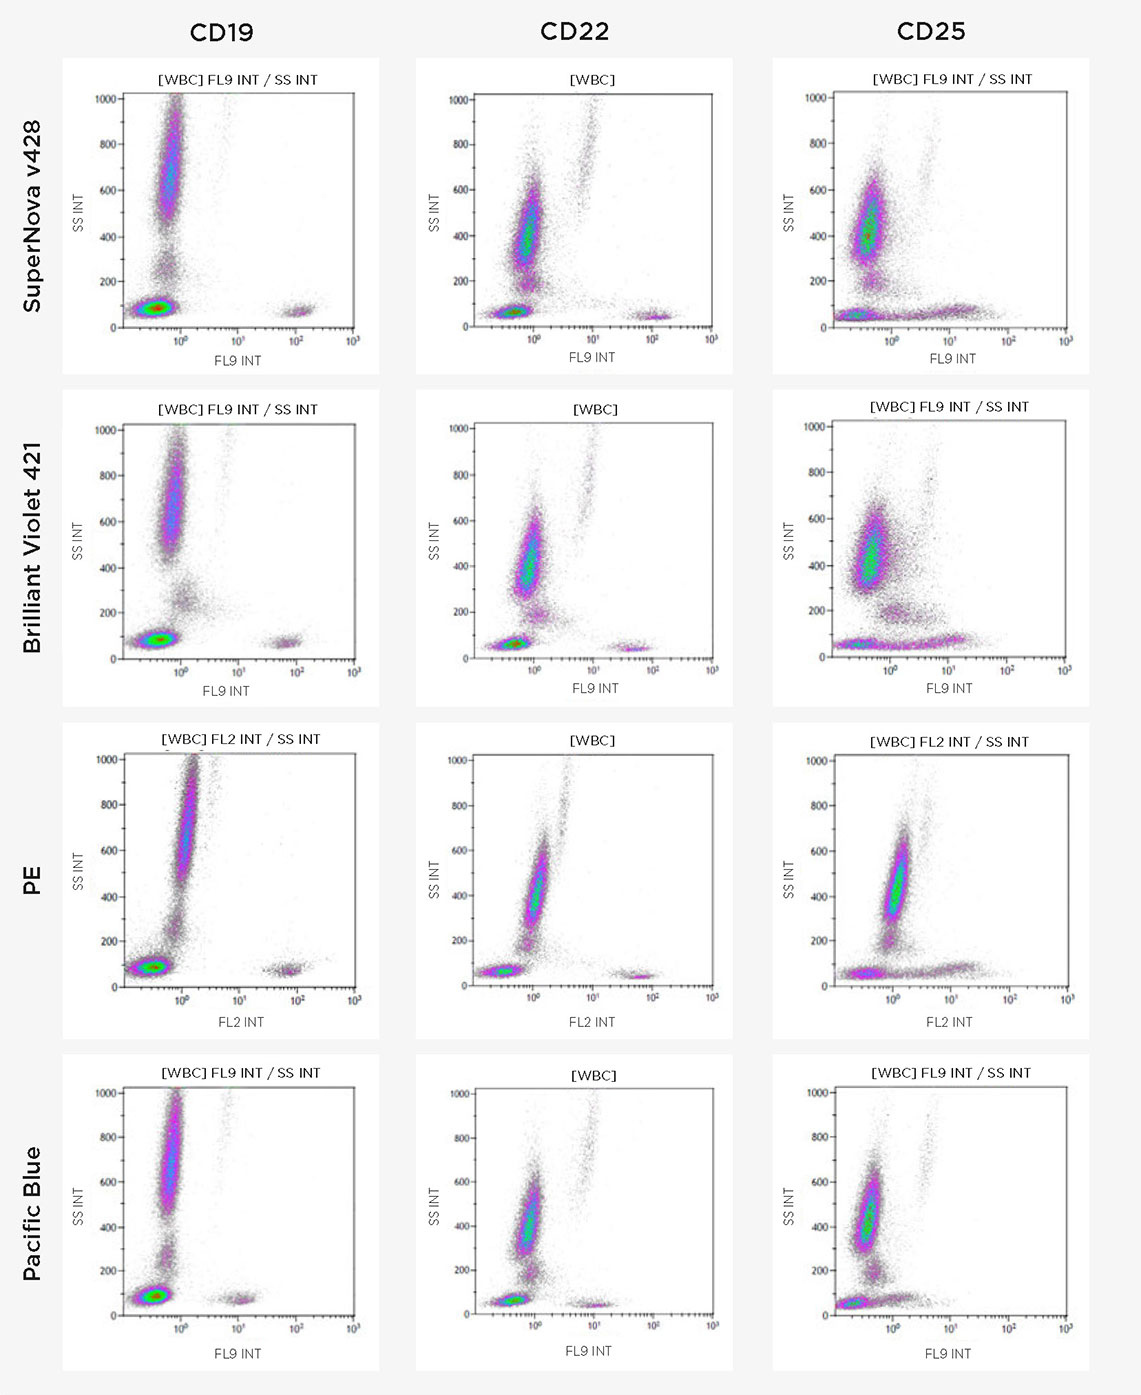 SuperNova v428 conjugates (with CD19, CD22, and CD25) compared against conjugates of BV421, PE and Pacific Blue in flow cytometry.